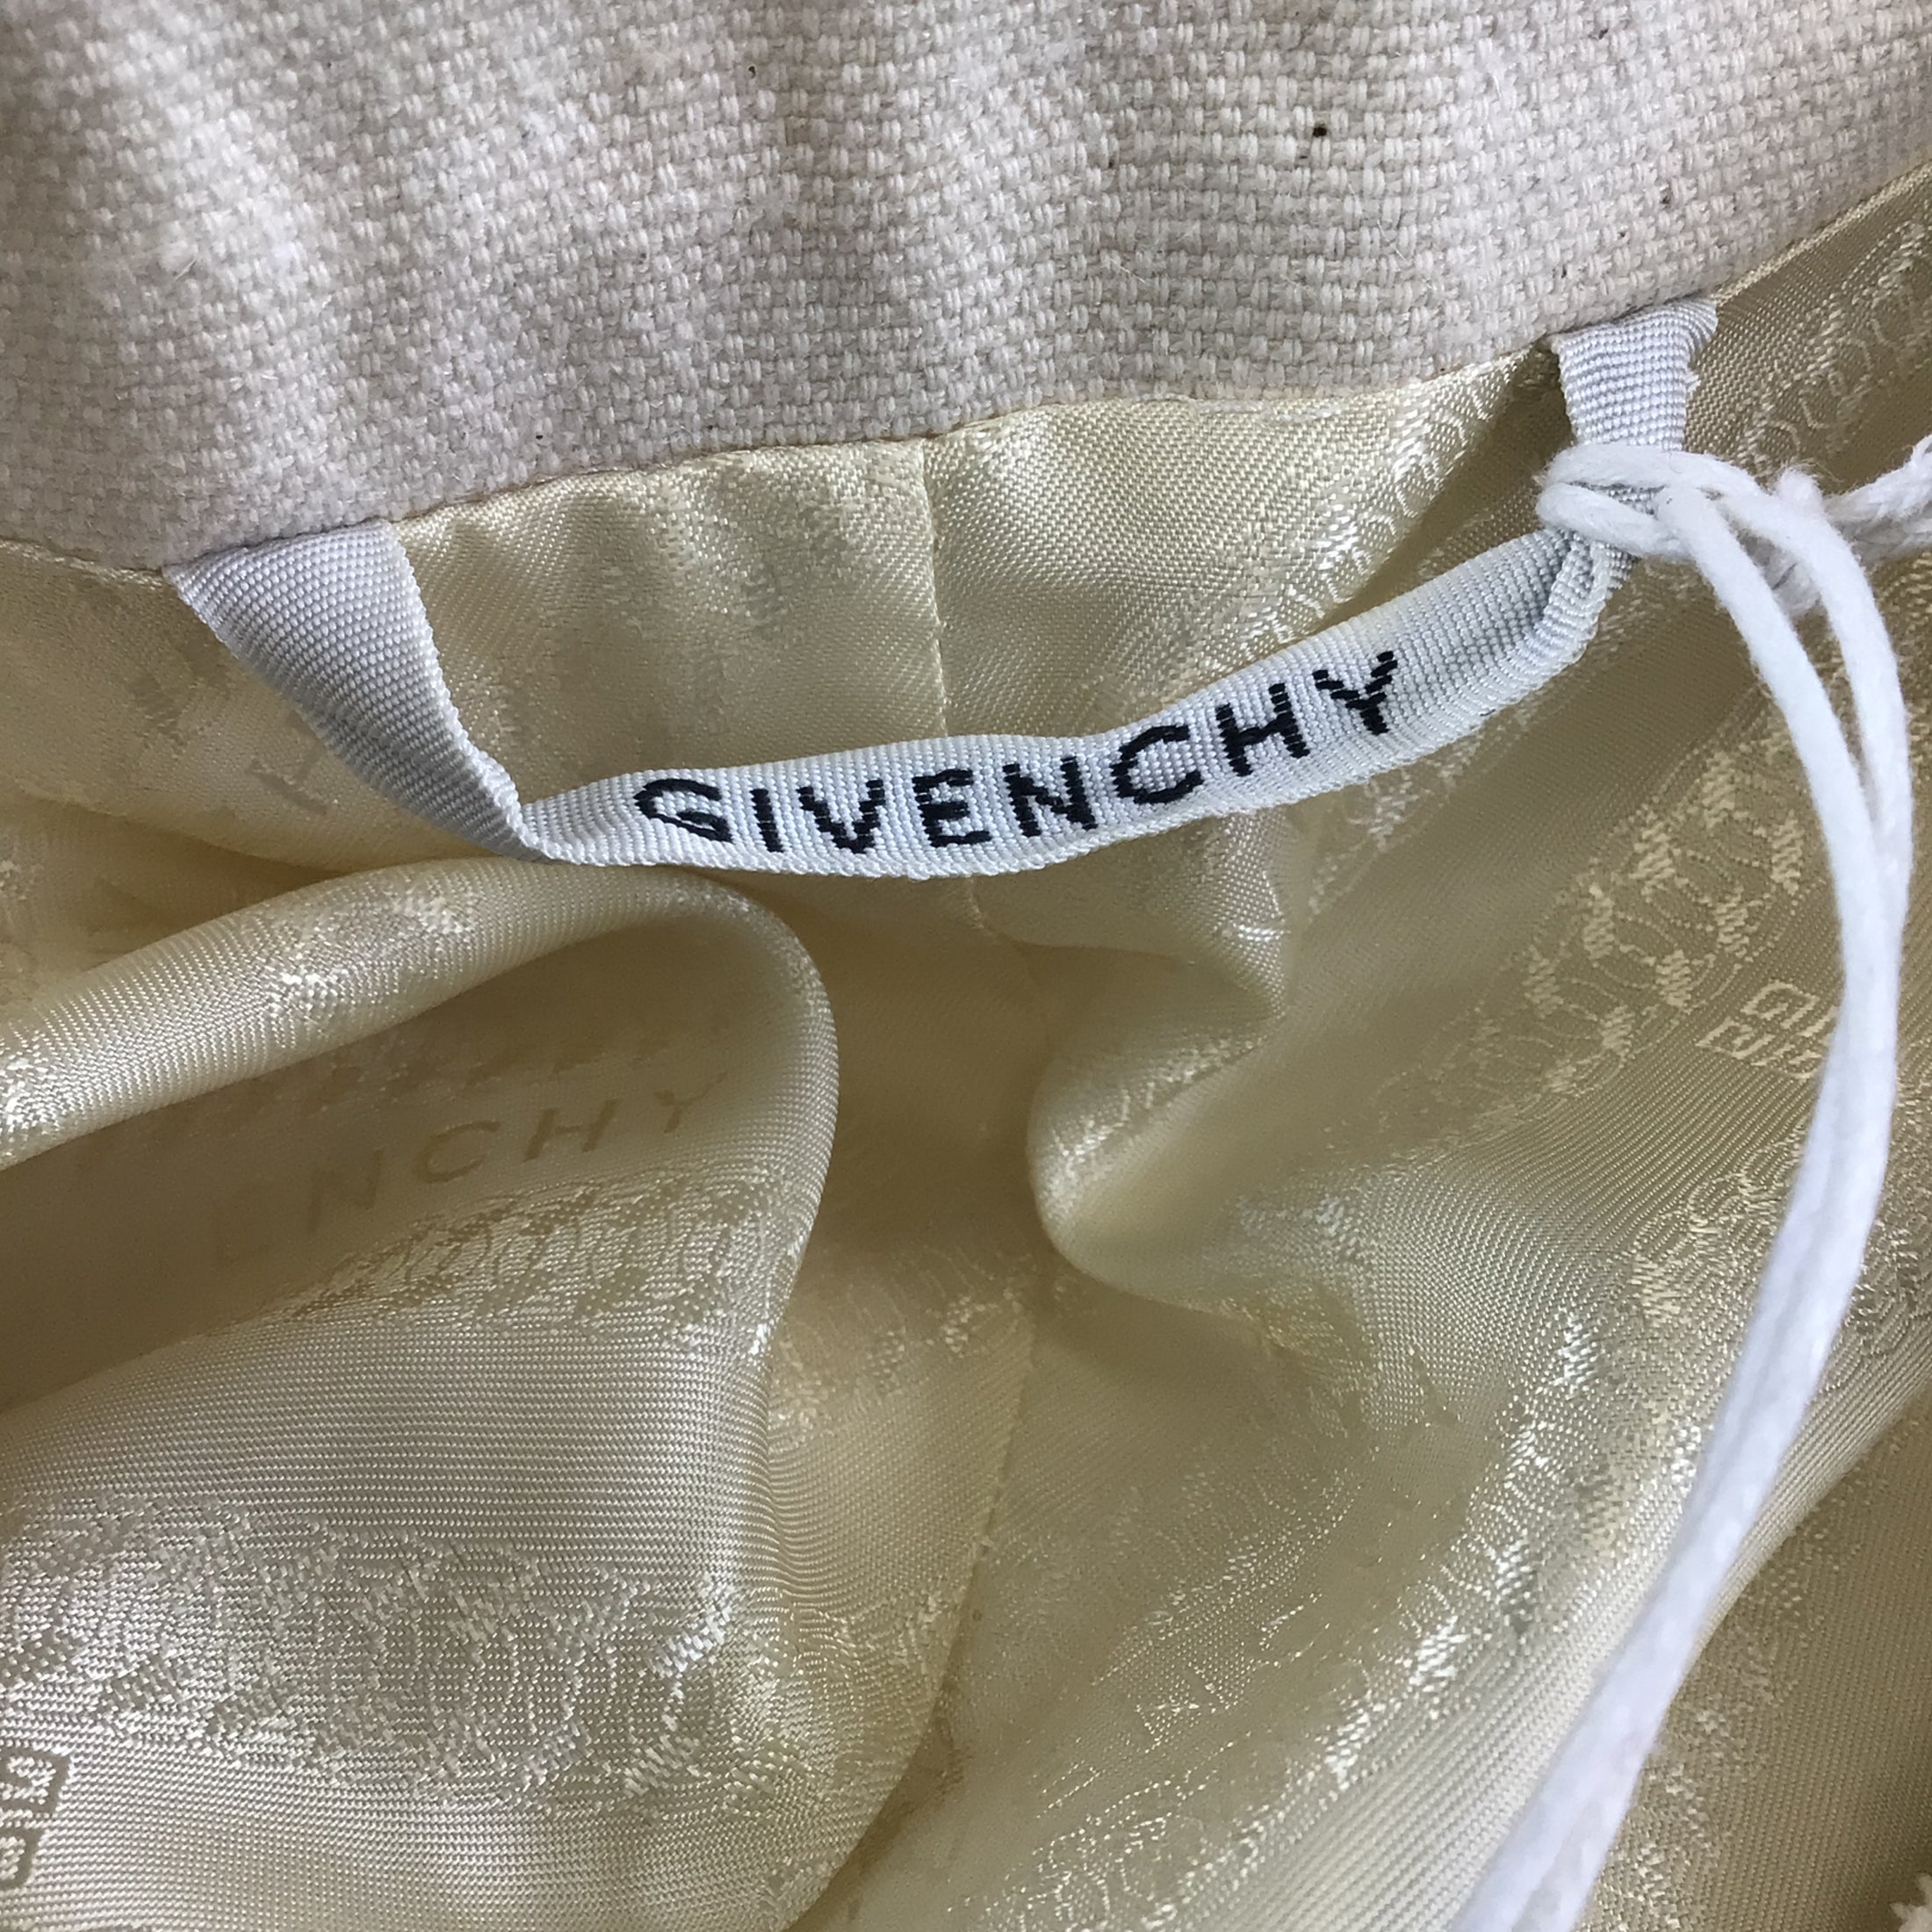 Givenchy Ecru Collarless Double Breasted Cotton and Linen Jacket